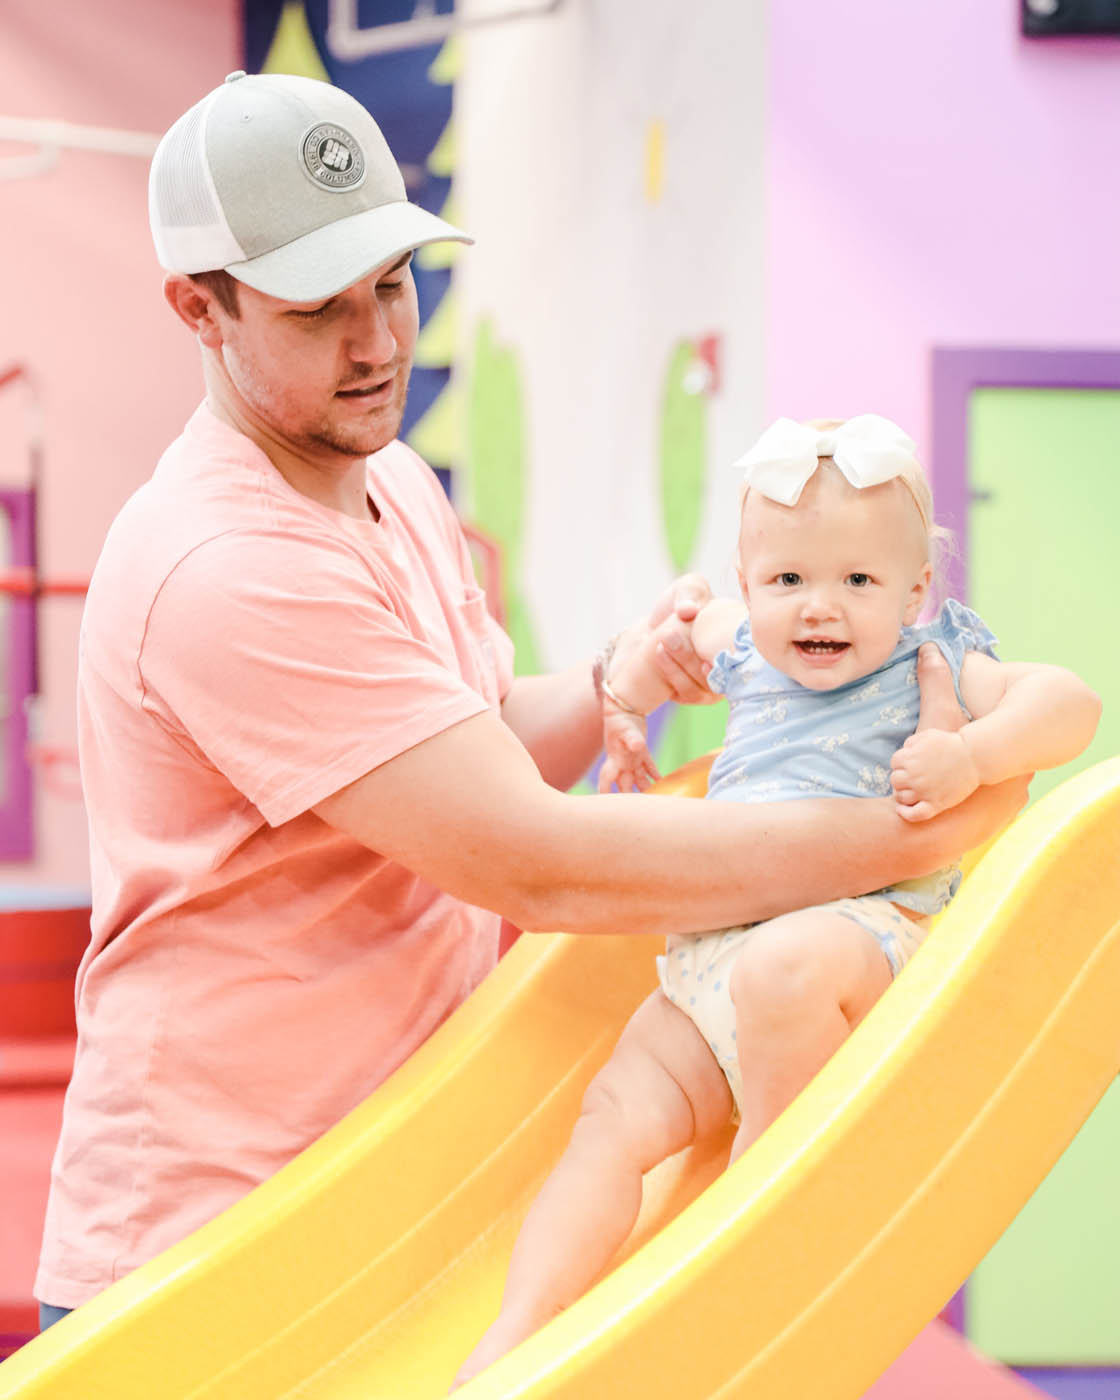 A dad and child playing at Romp n' Roll St. Petersburg's family fun place.